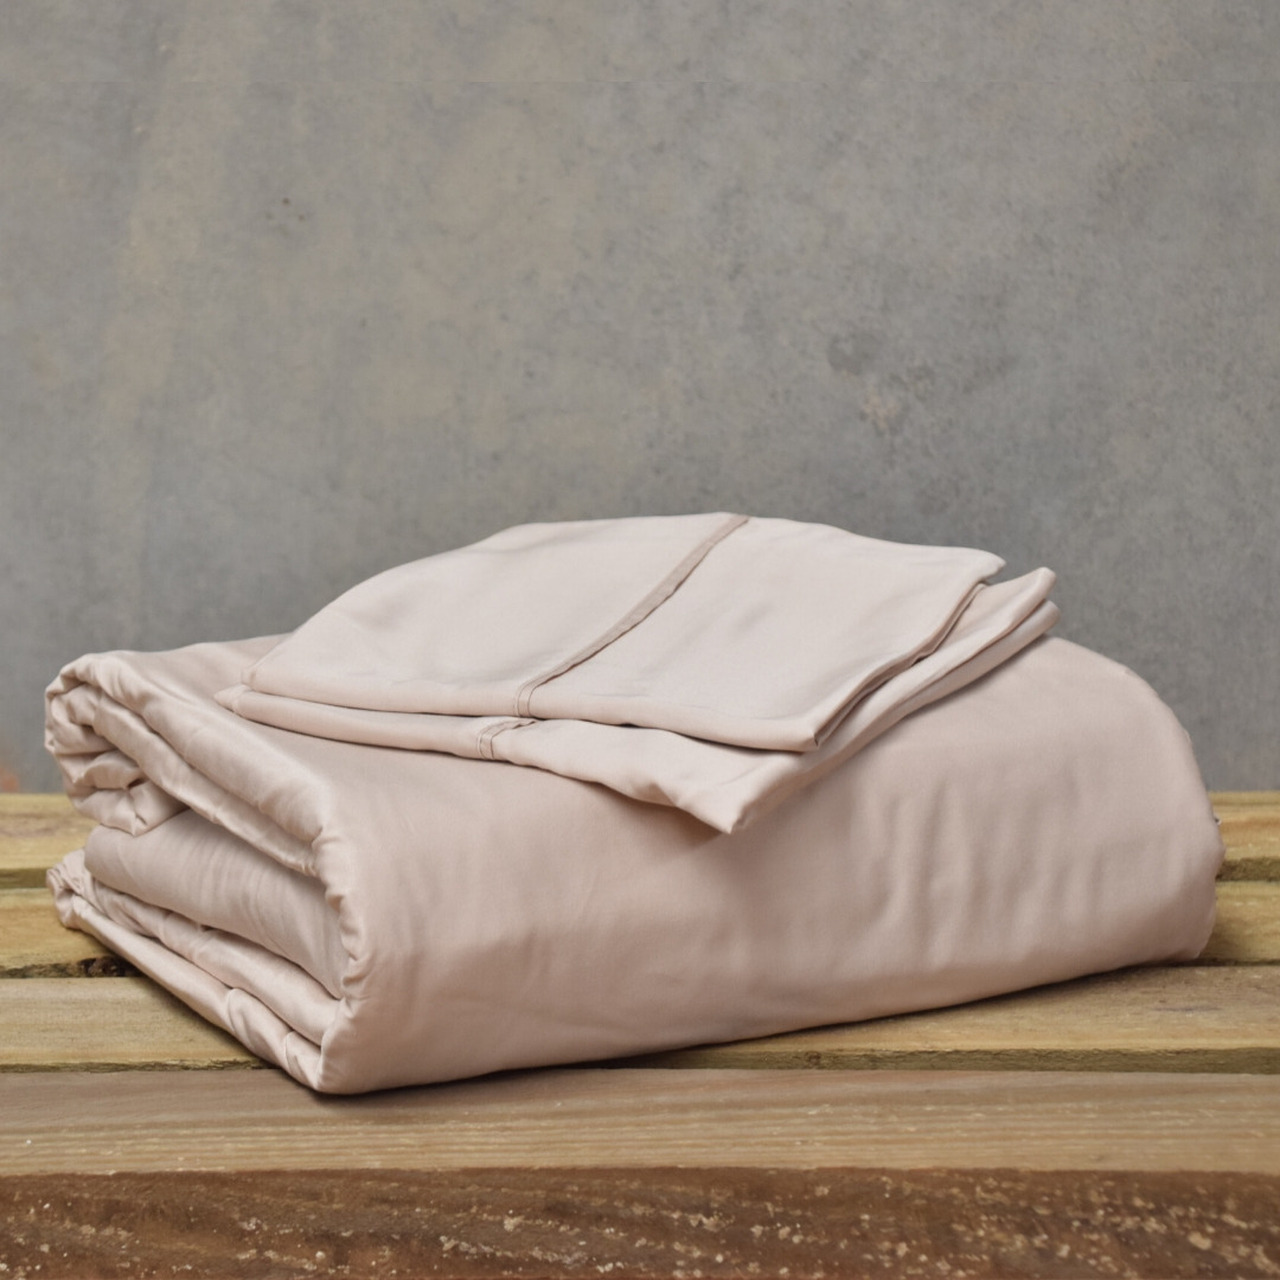 bamboo in soft pink moisture absorbent